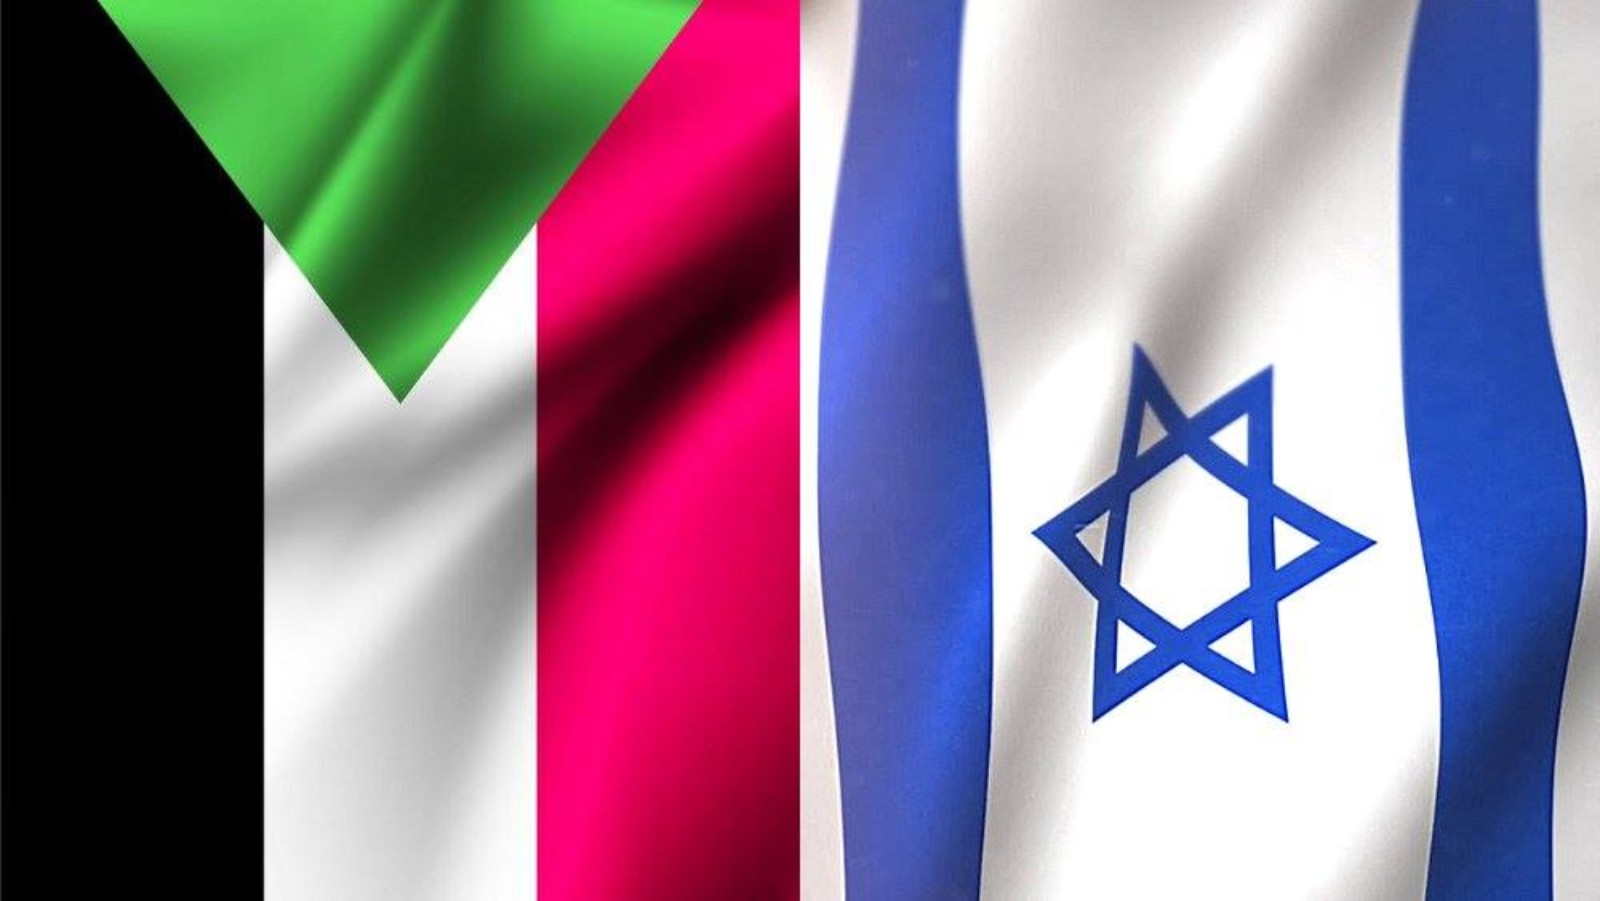 The Sudanese and Israeli flags. Photo courtesy of Israeli Ministry of Foreign Affairs